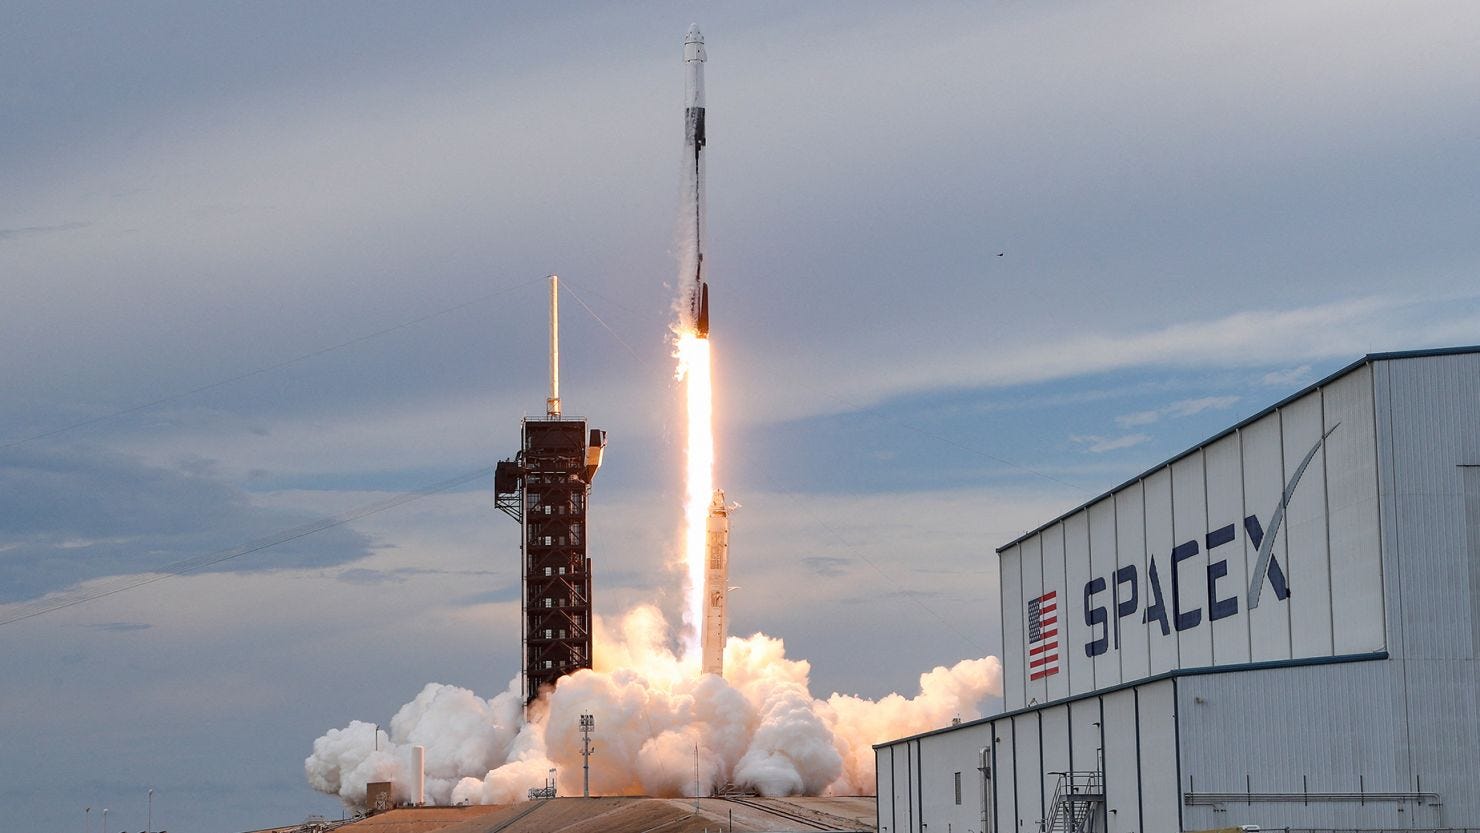 SpaceX: Pioneering a New Era in Space Exploration